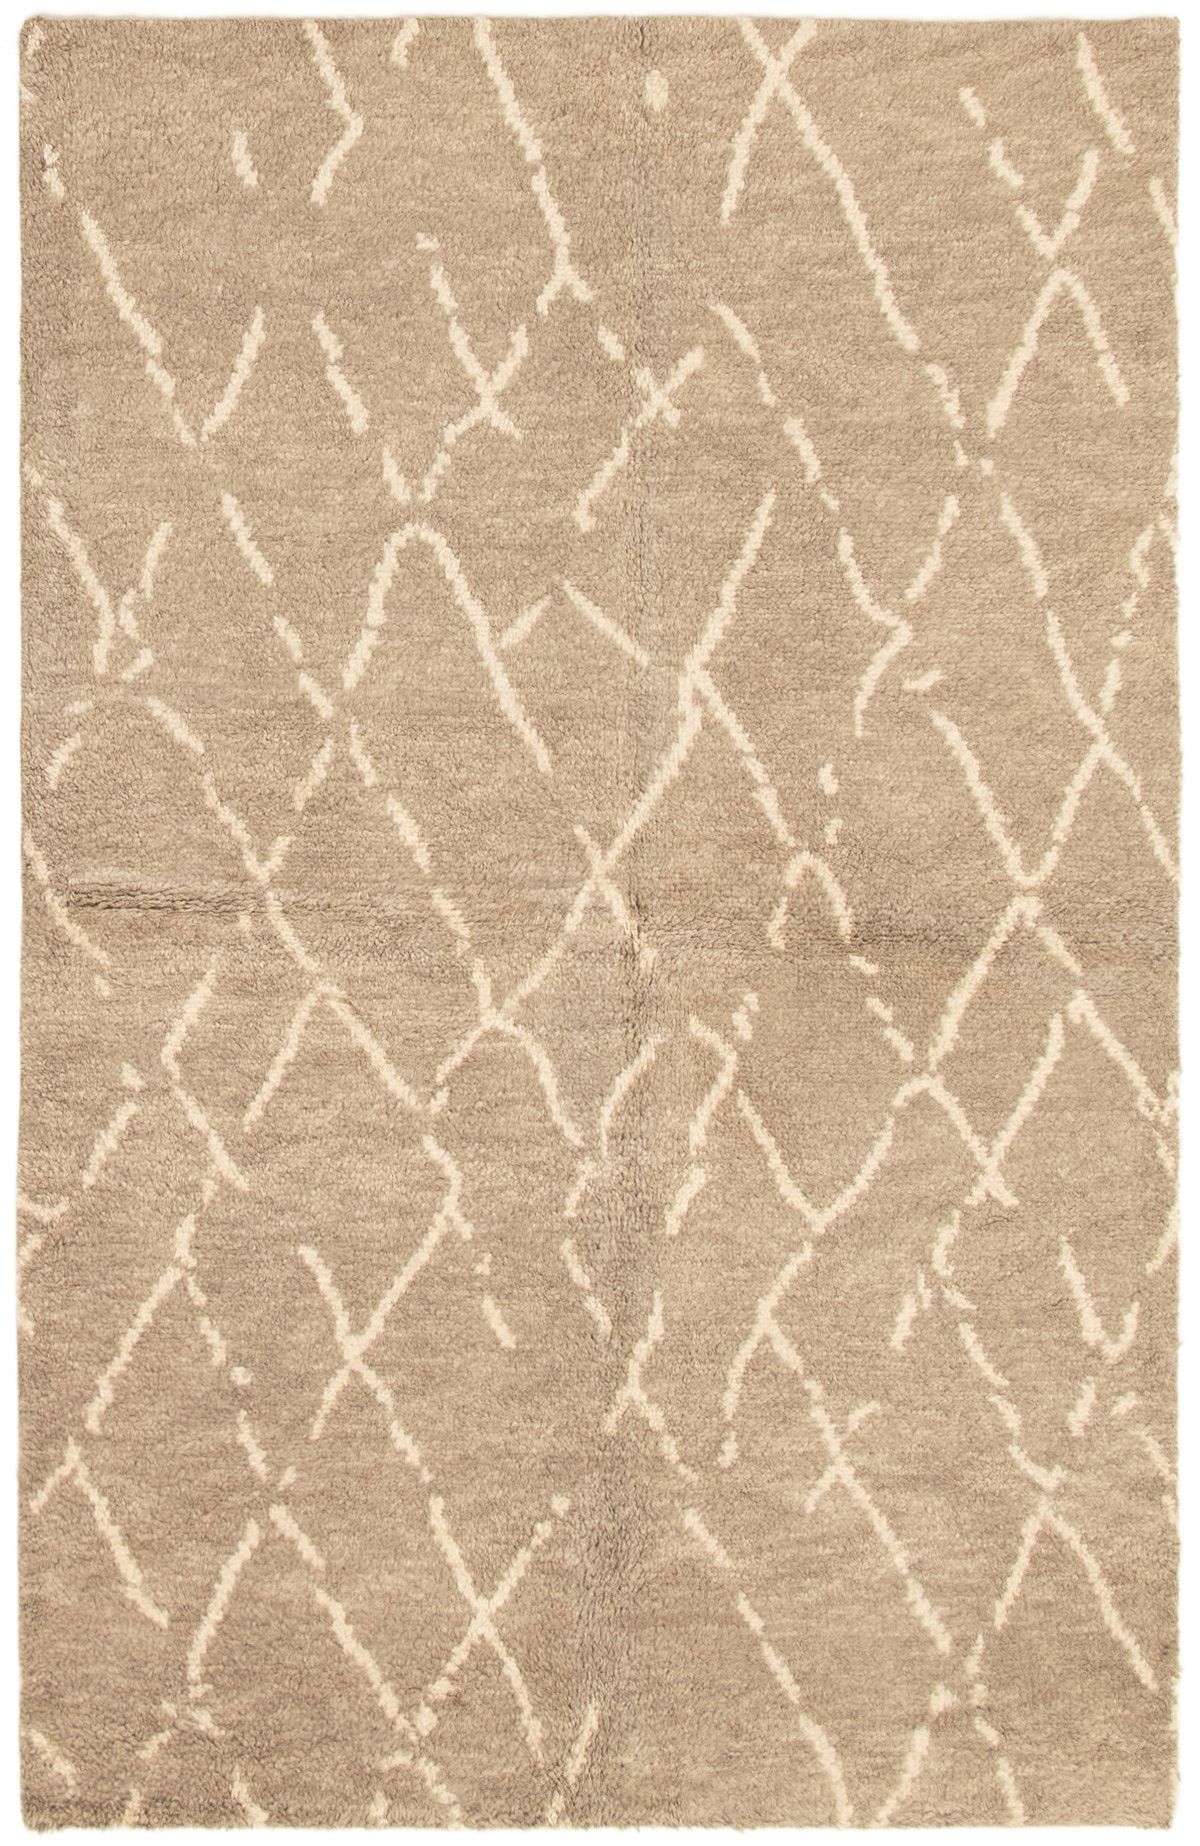 Hand-knotted Arlequin Khaki Wool Rug 5'1" x 8'0" Size: 5'1" x 8'0"  